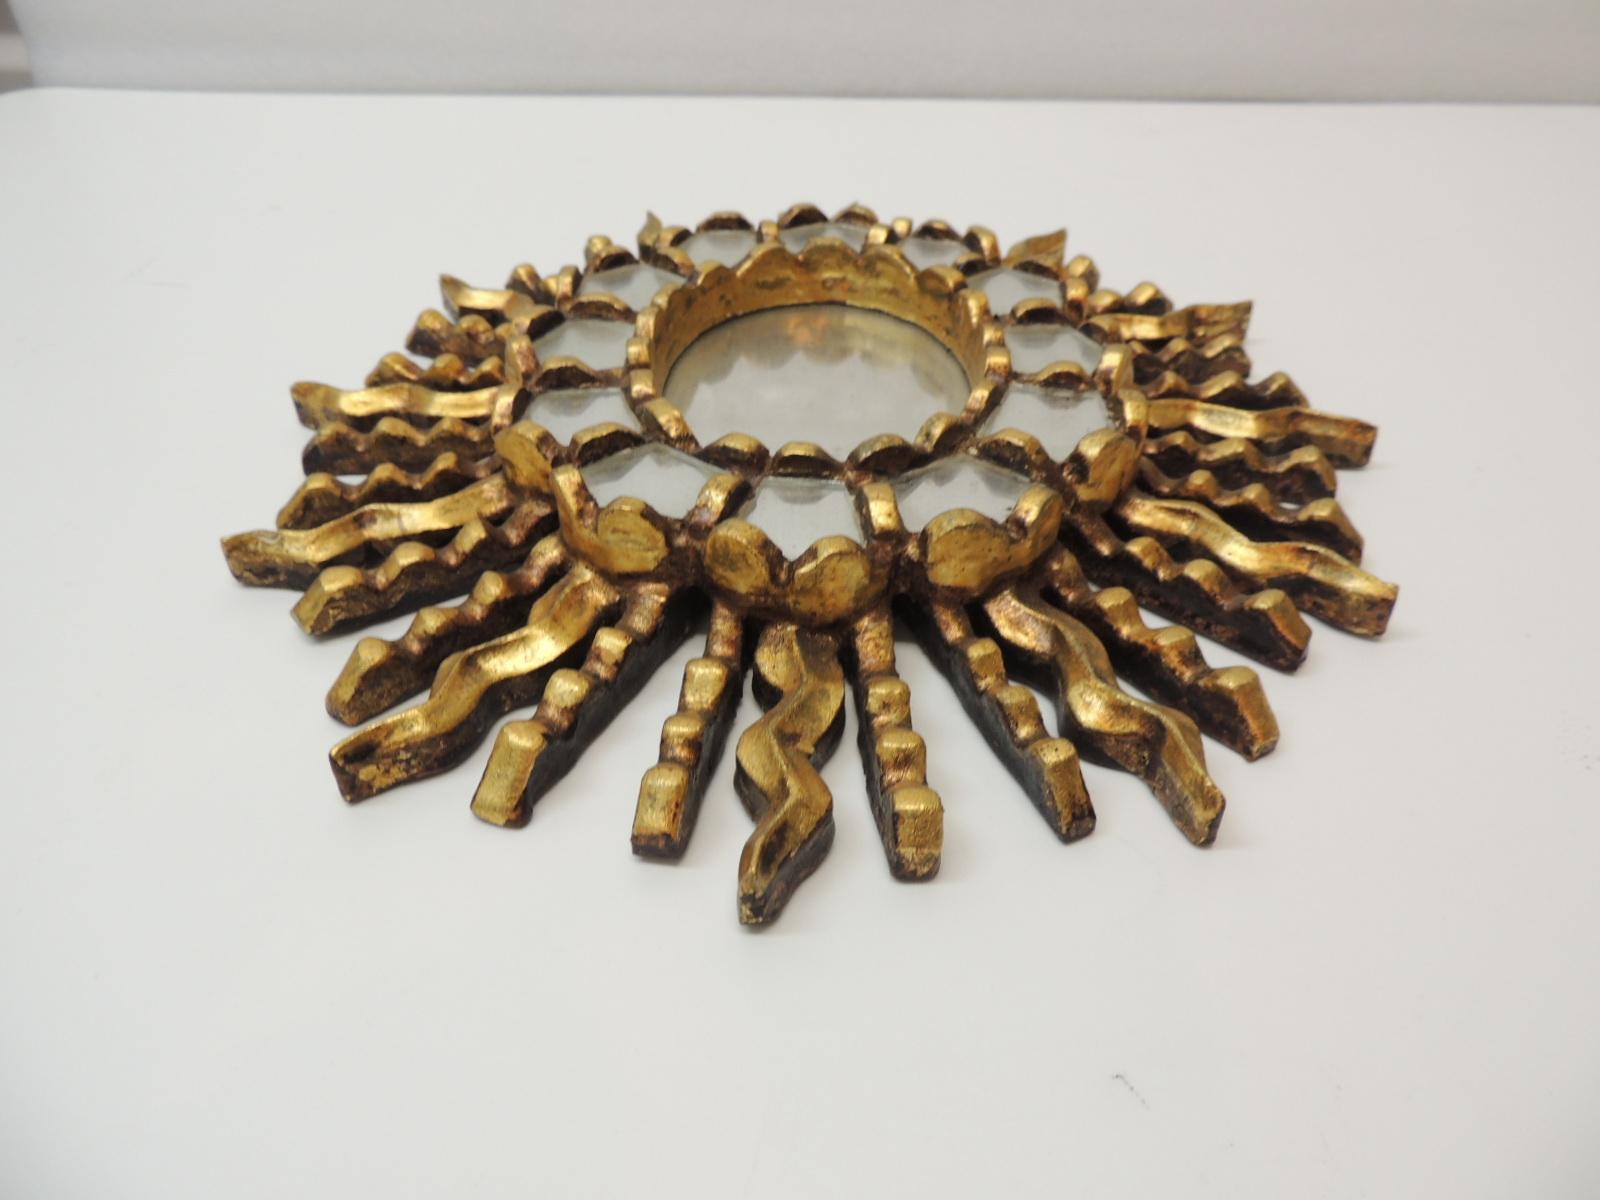 Vintage small gold leaf on wood oval sunburst Peruvian mirror
Hanging hook in the back
Size: 11